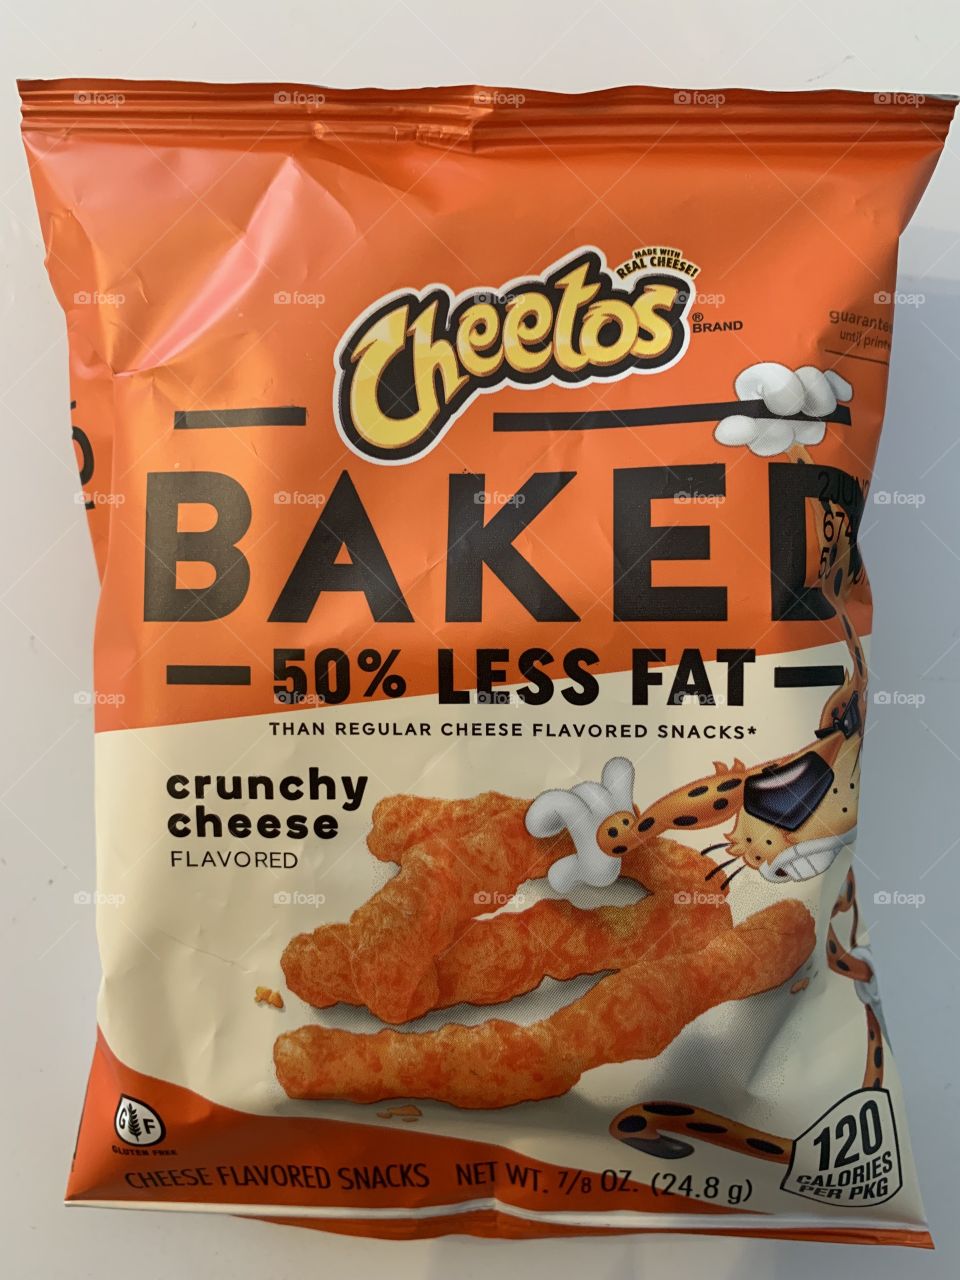 THOSE CHEETOS LOOK GREAT! 